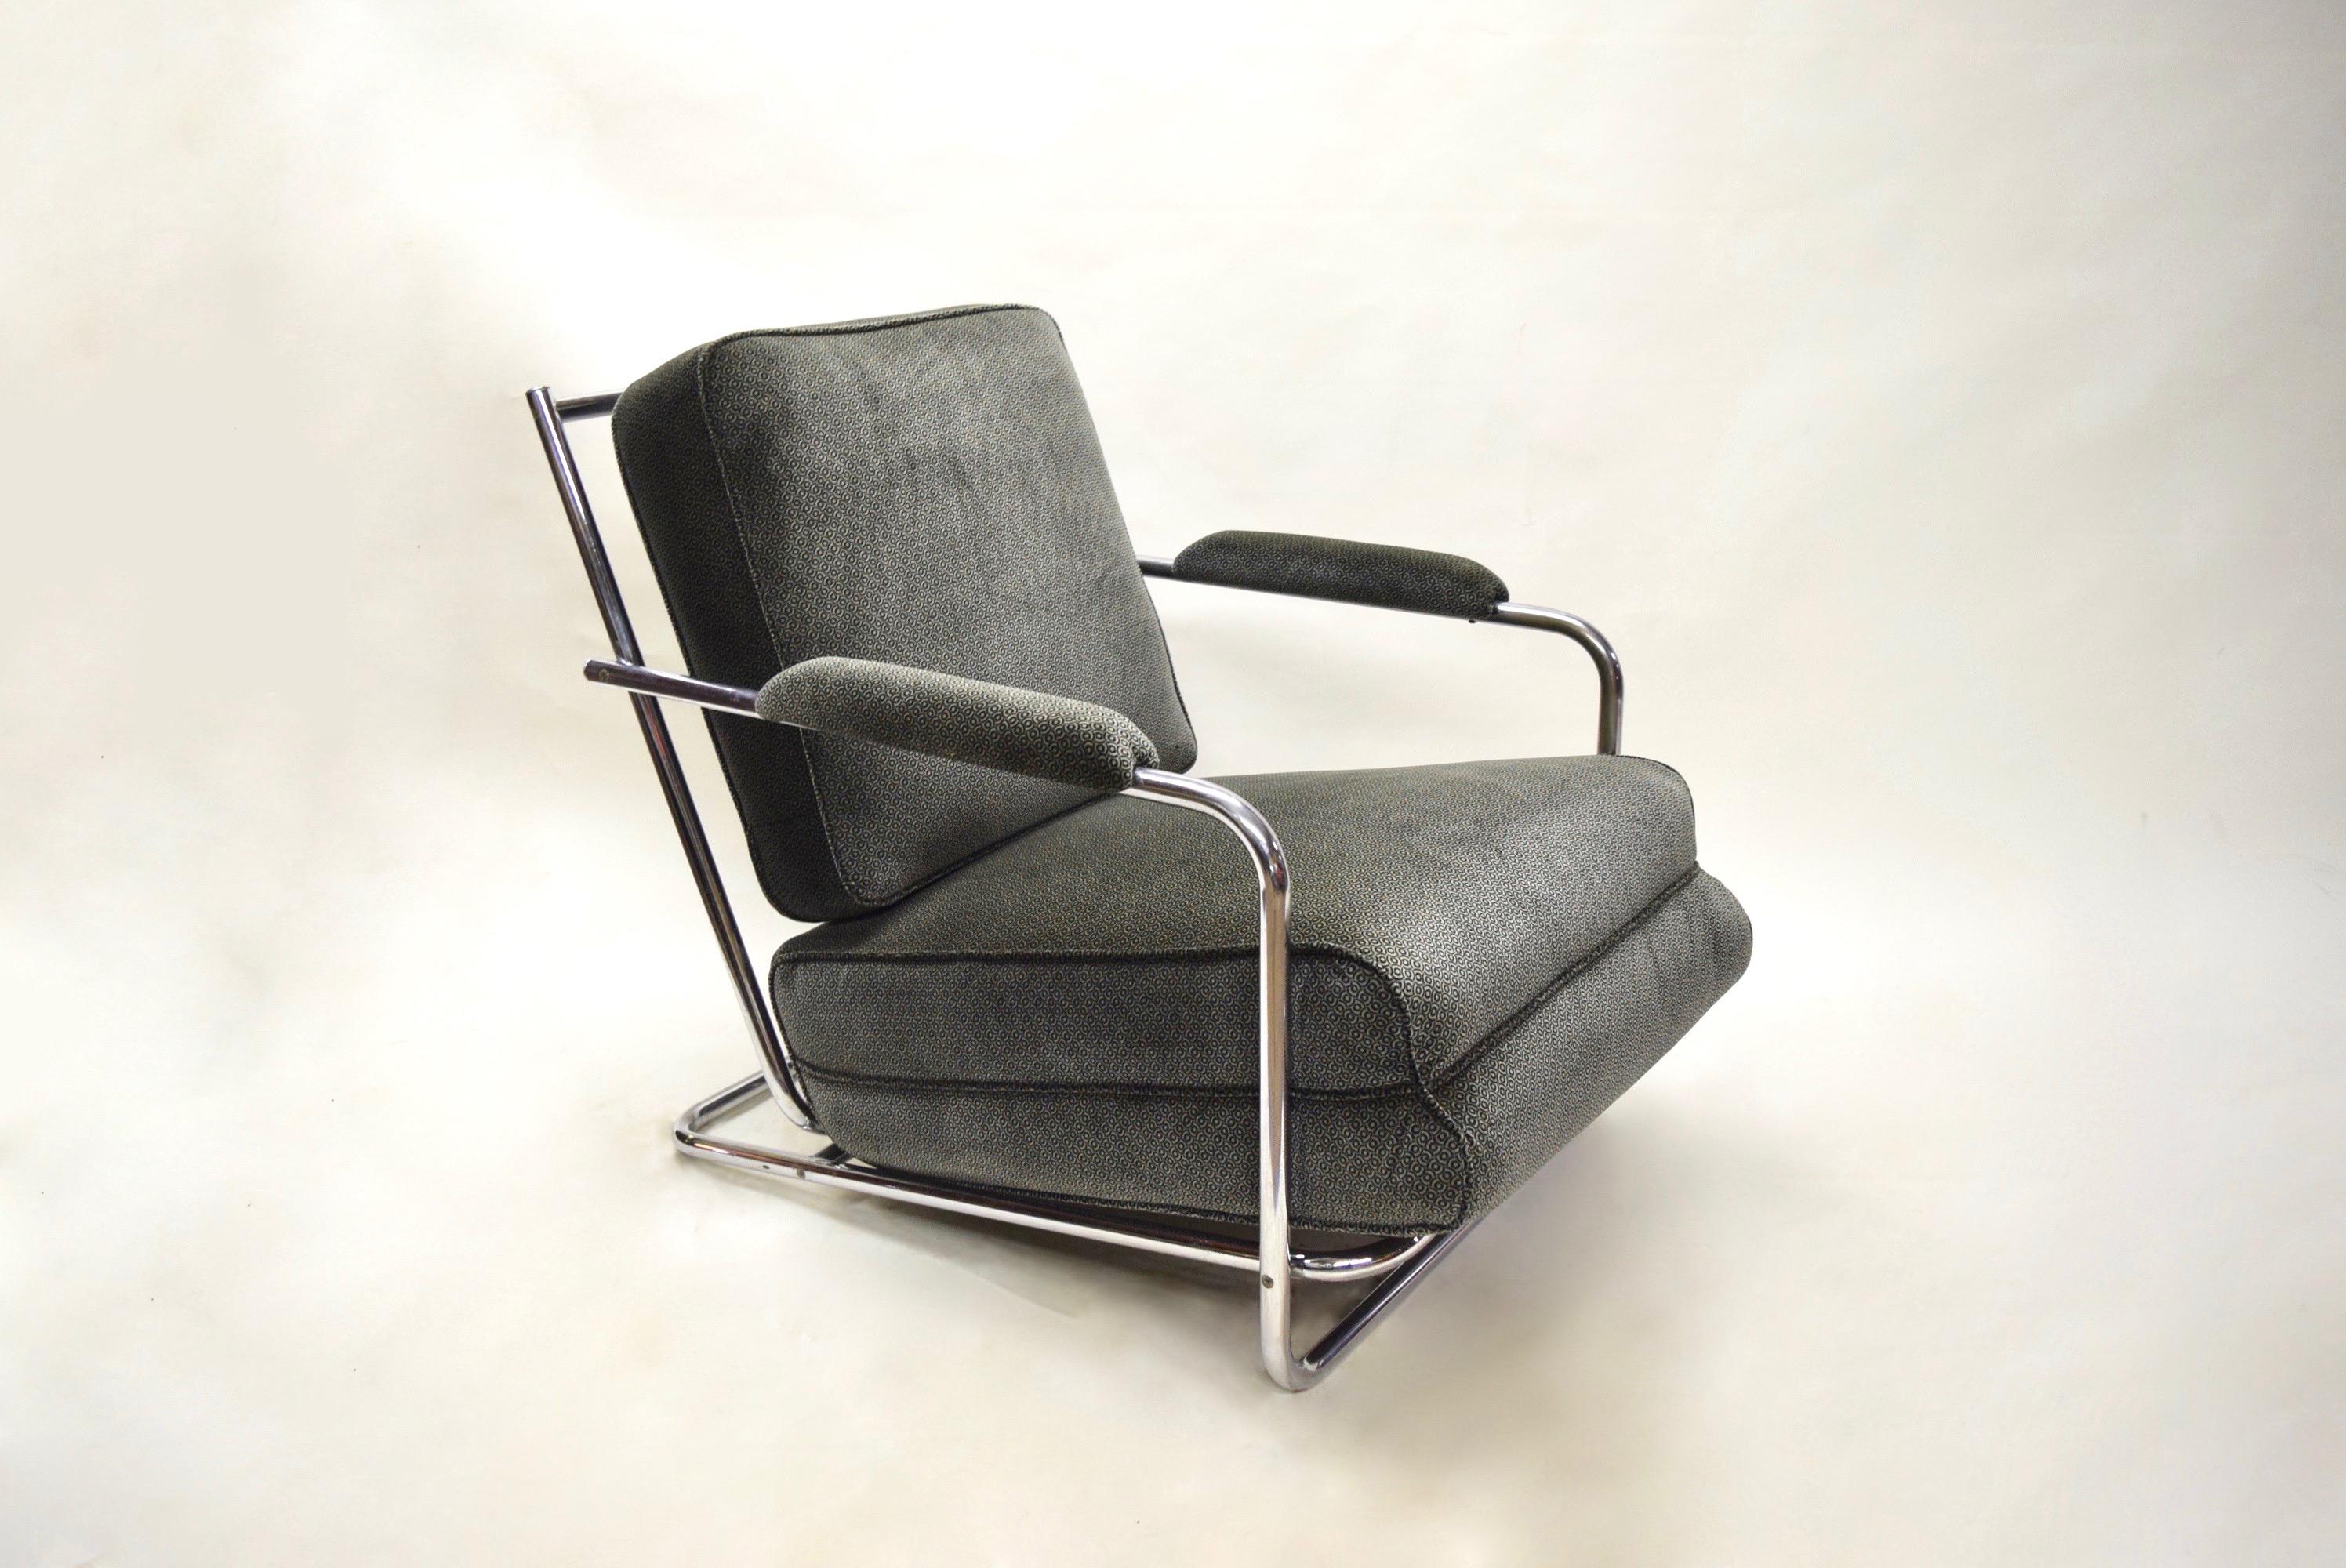 Mid-20th Century Pair of Lounge Chairs by Gilbert Rohde, USA Circa 1935